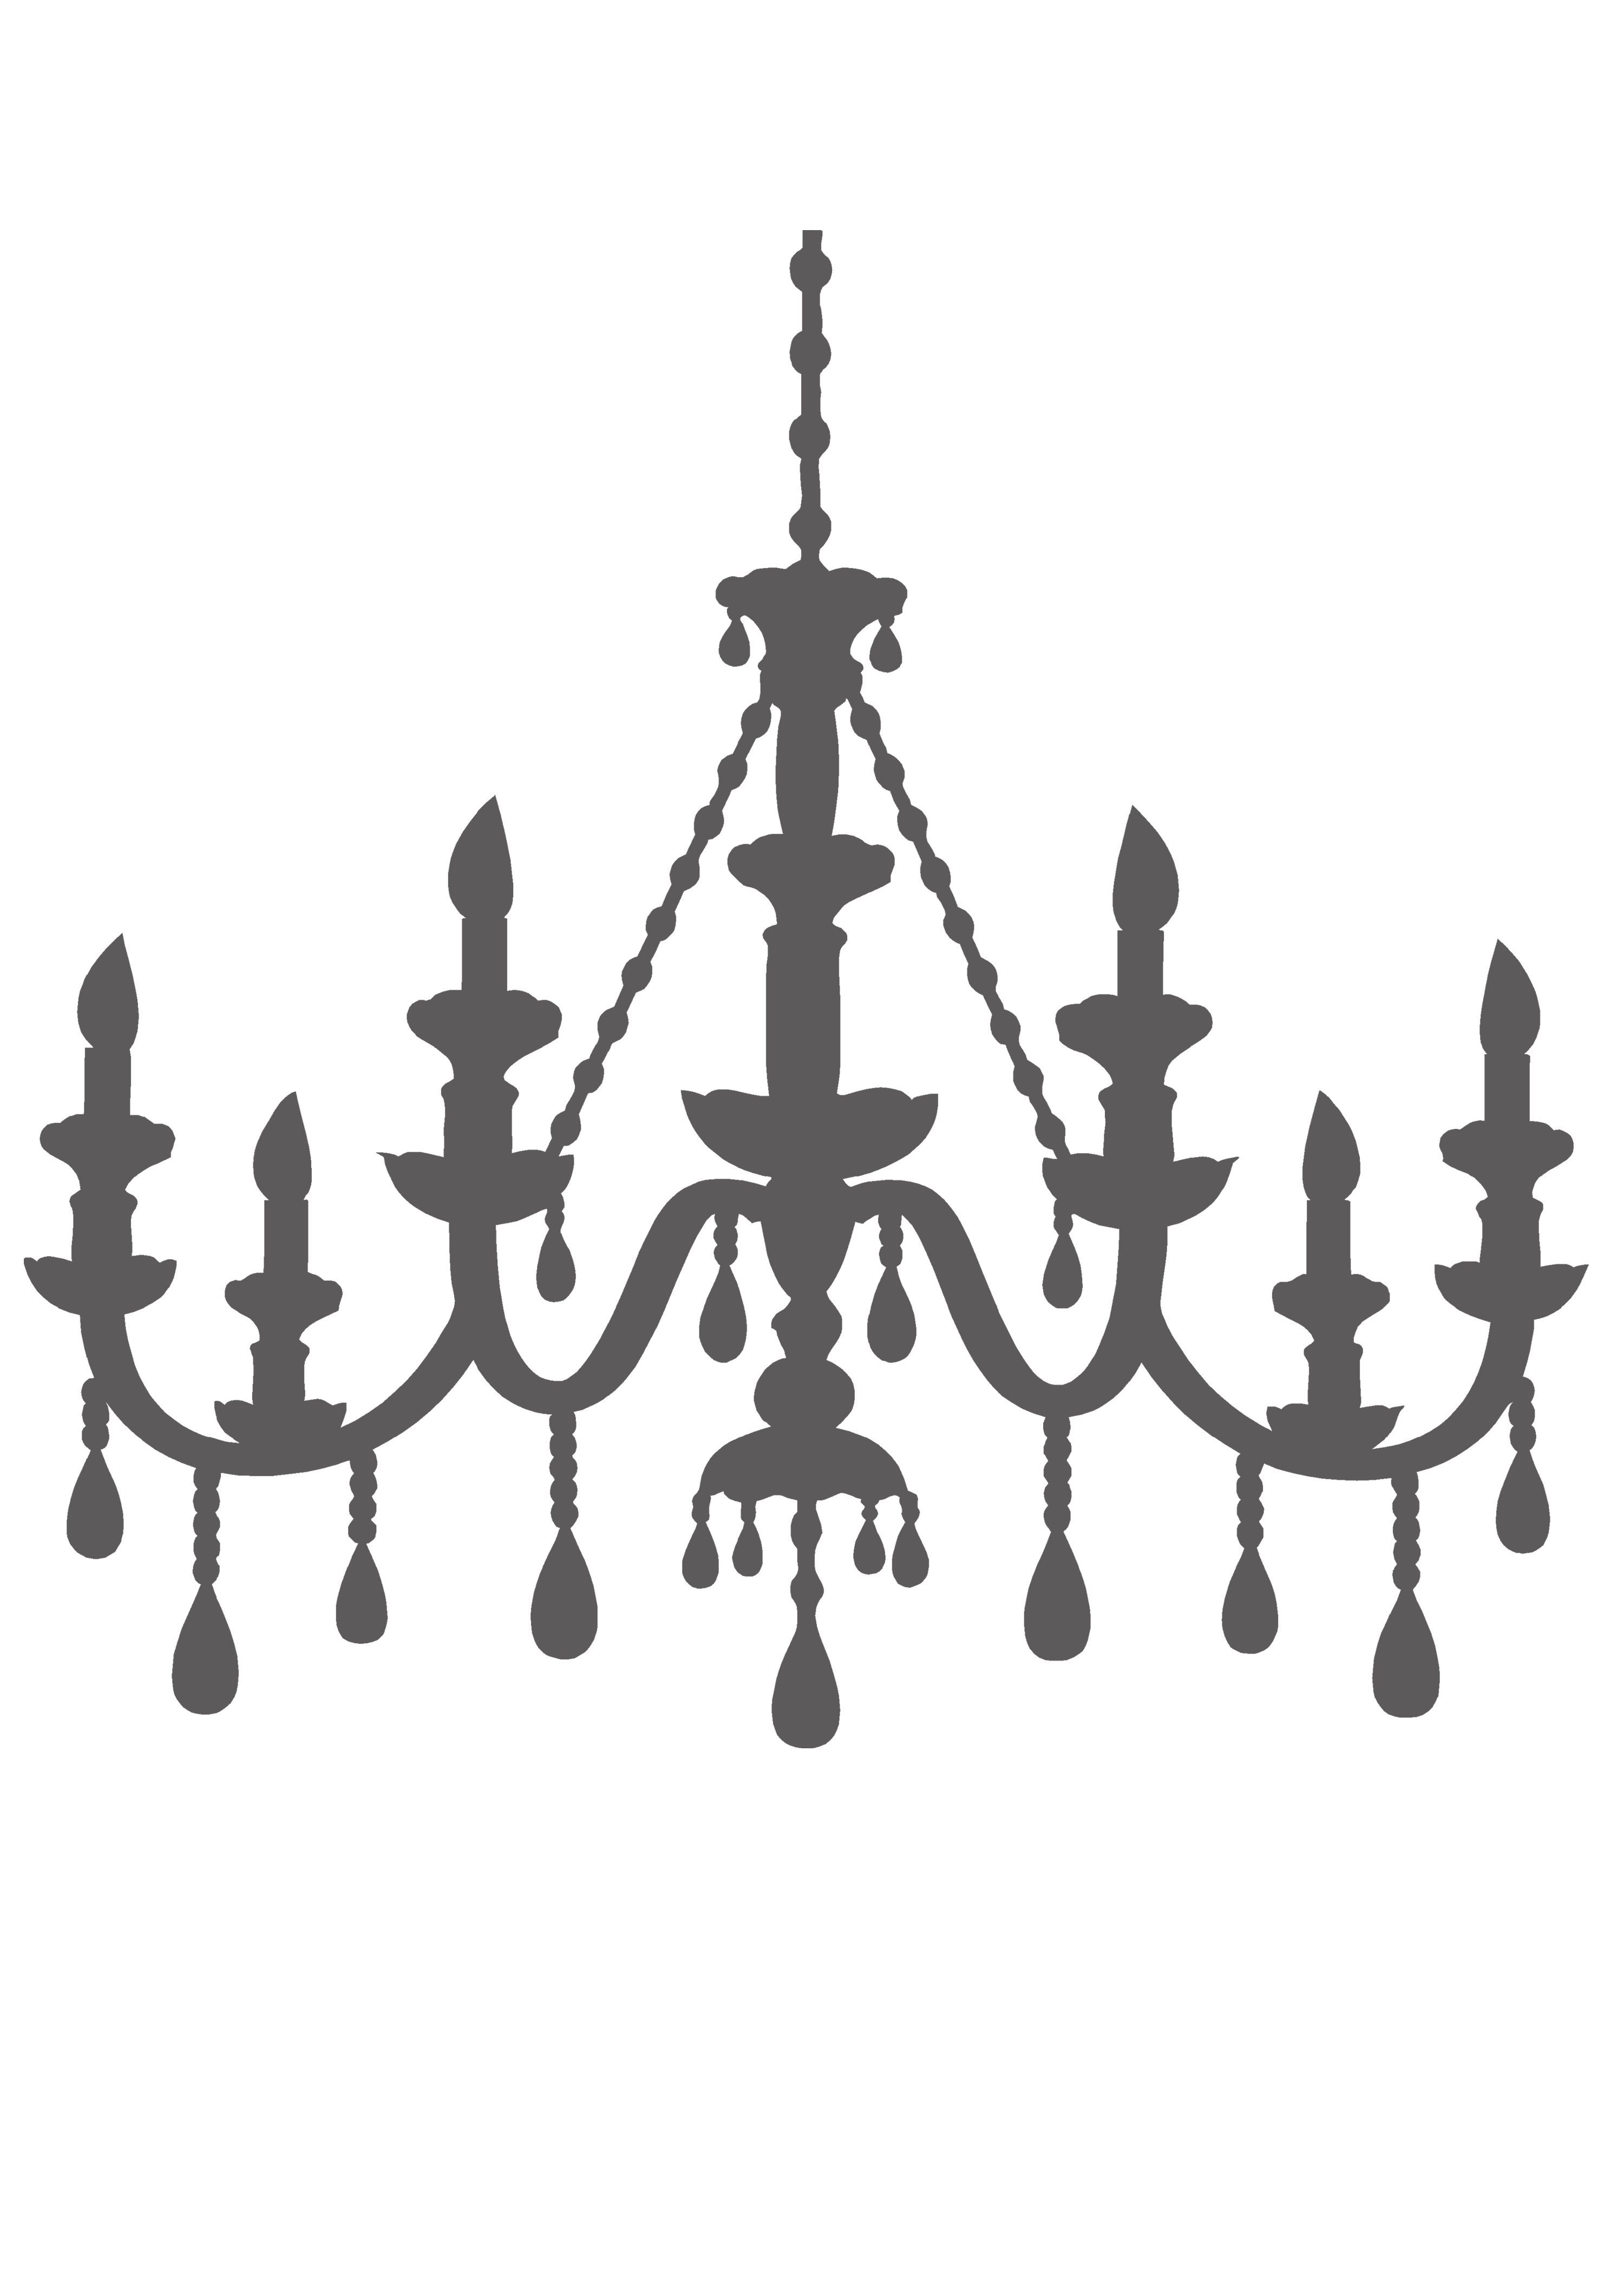 Chandelier template for brooke. Clipart candle candil